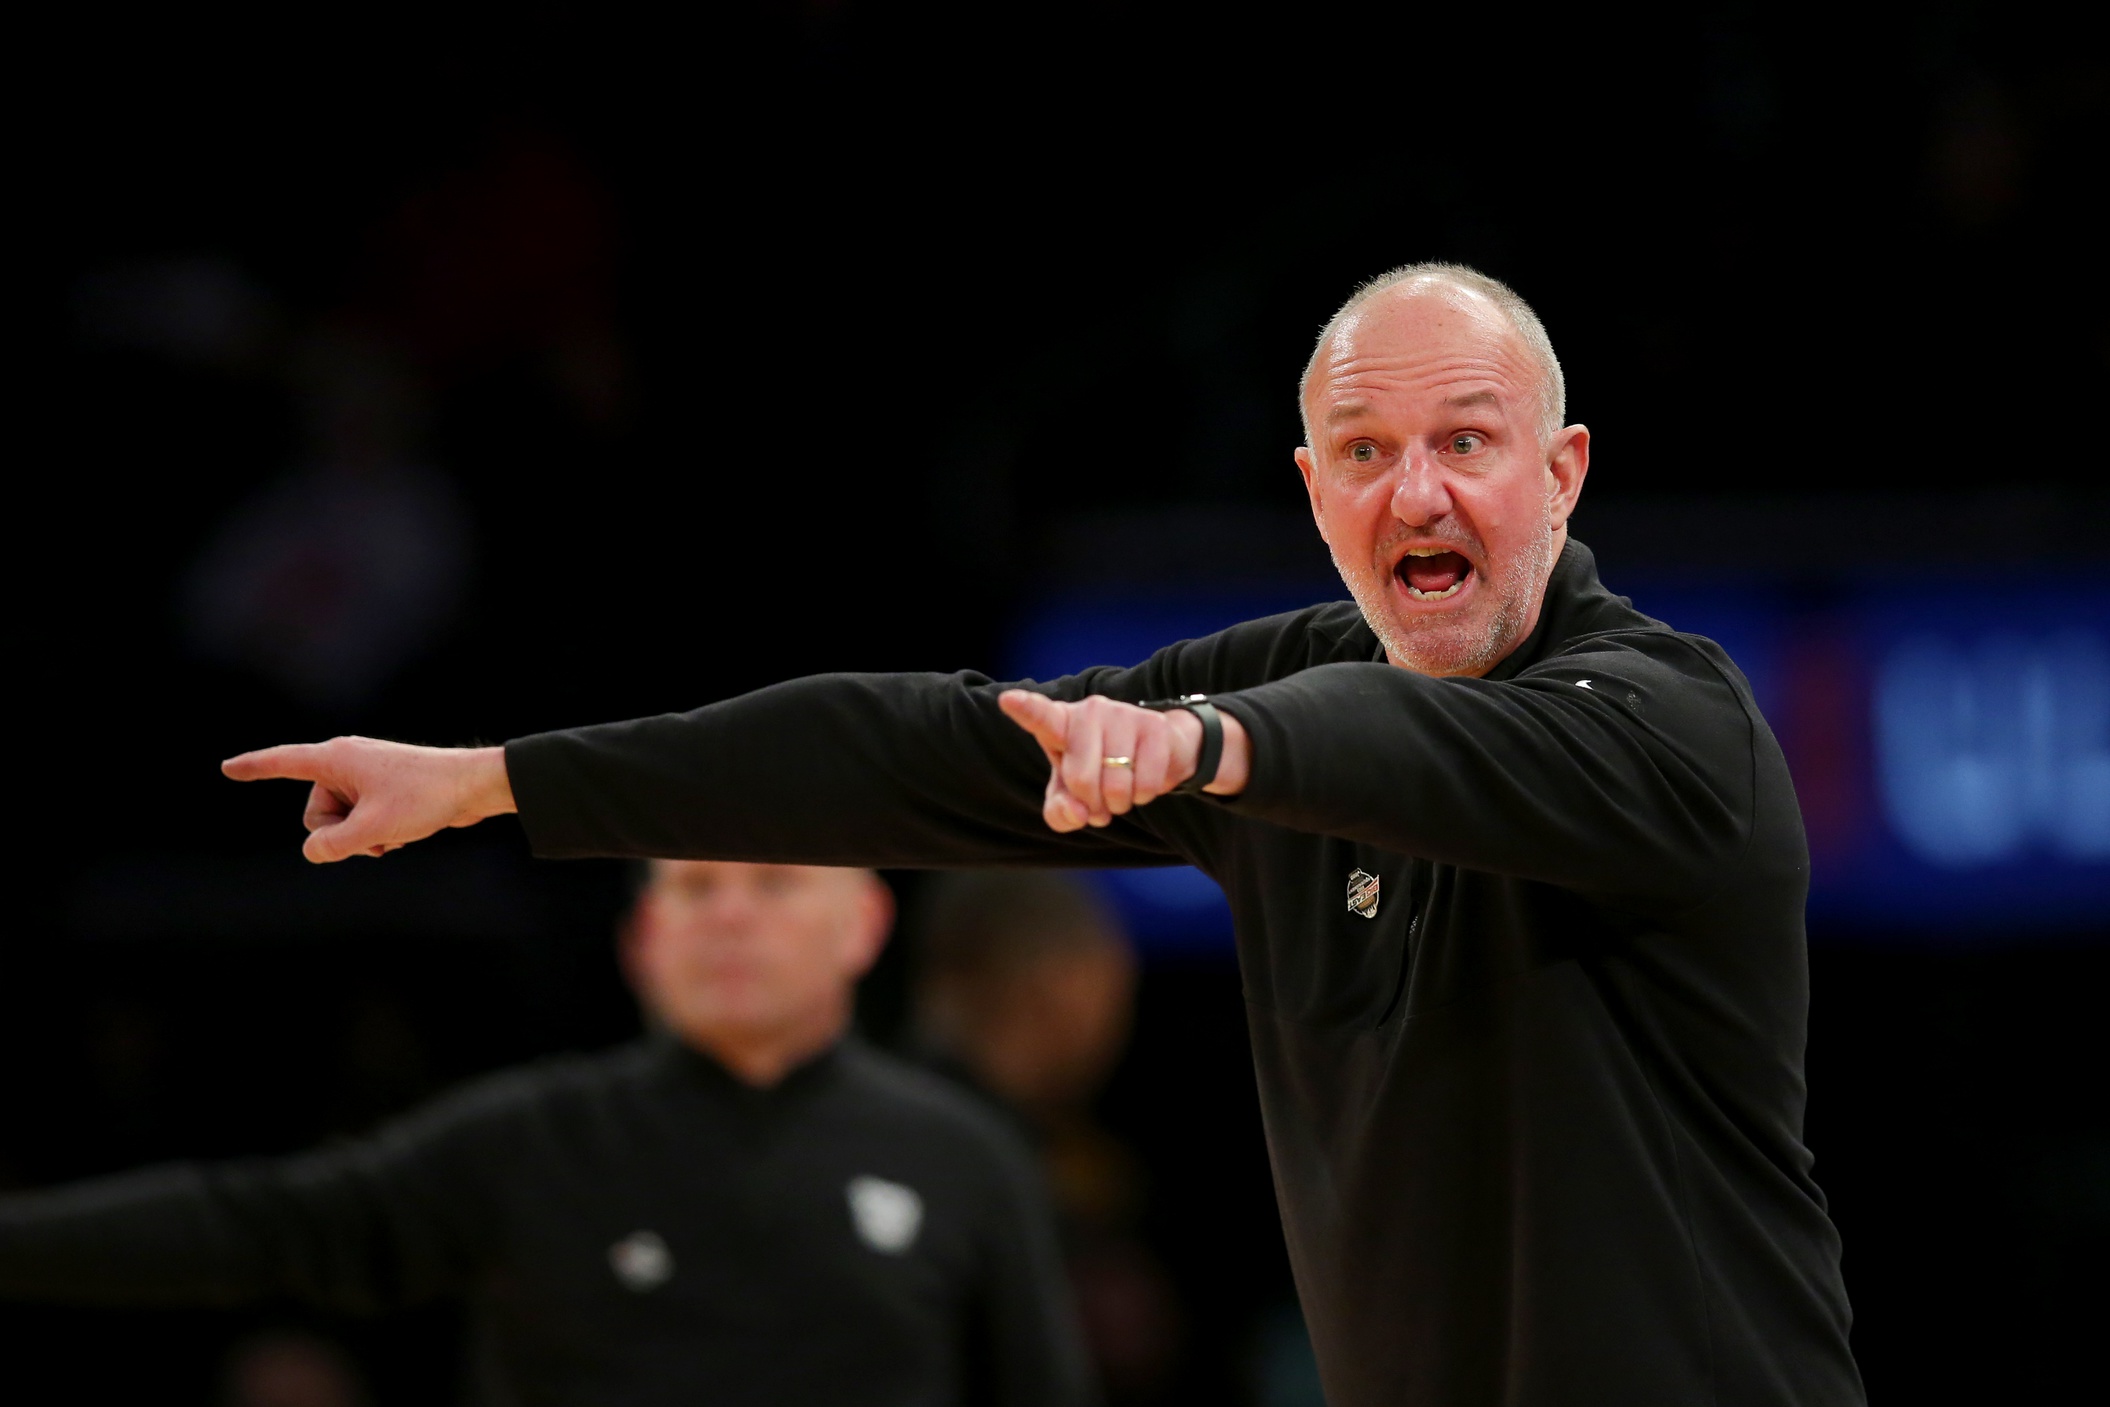 Mar 8, 2023; New York, NY, USA; Butler Bulldogs head coach Thad Matta coaches against the St. John's Red Storm during the second half at Madison Square Garden. Mandatory Credit: Brad Penner-USA TODAY Sports